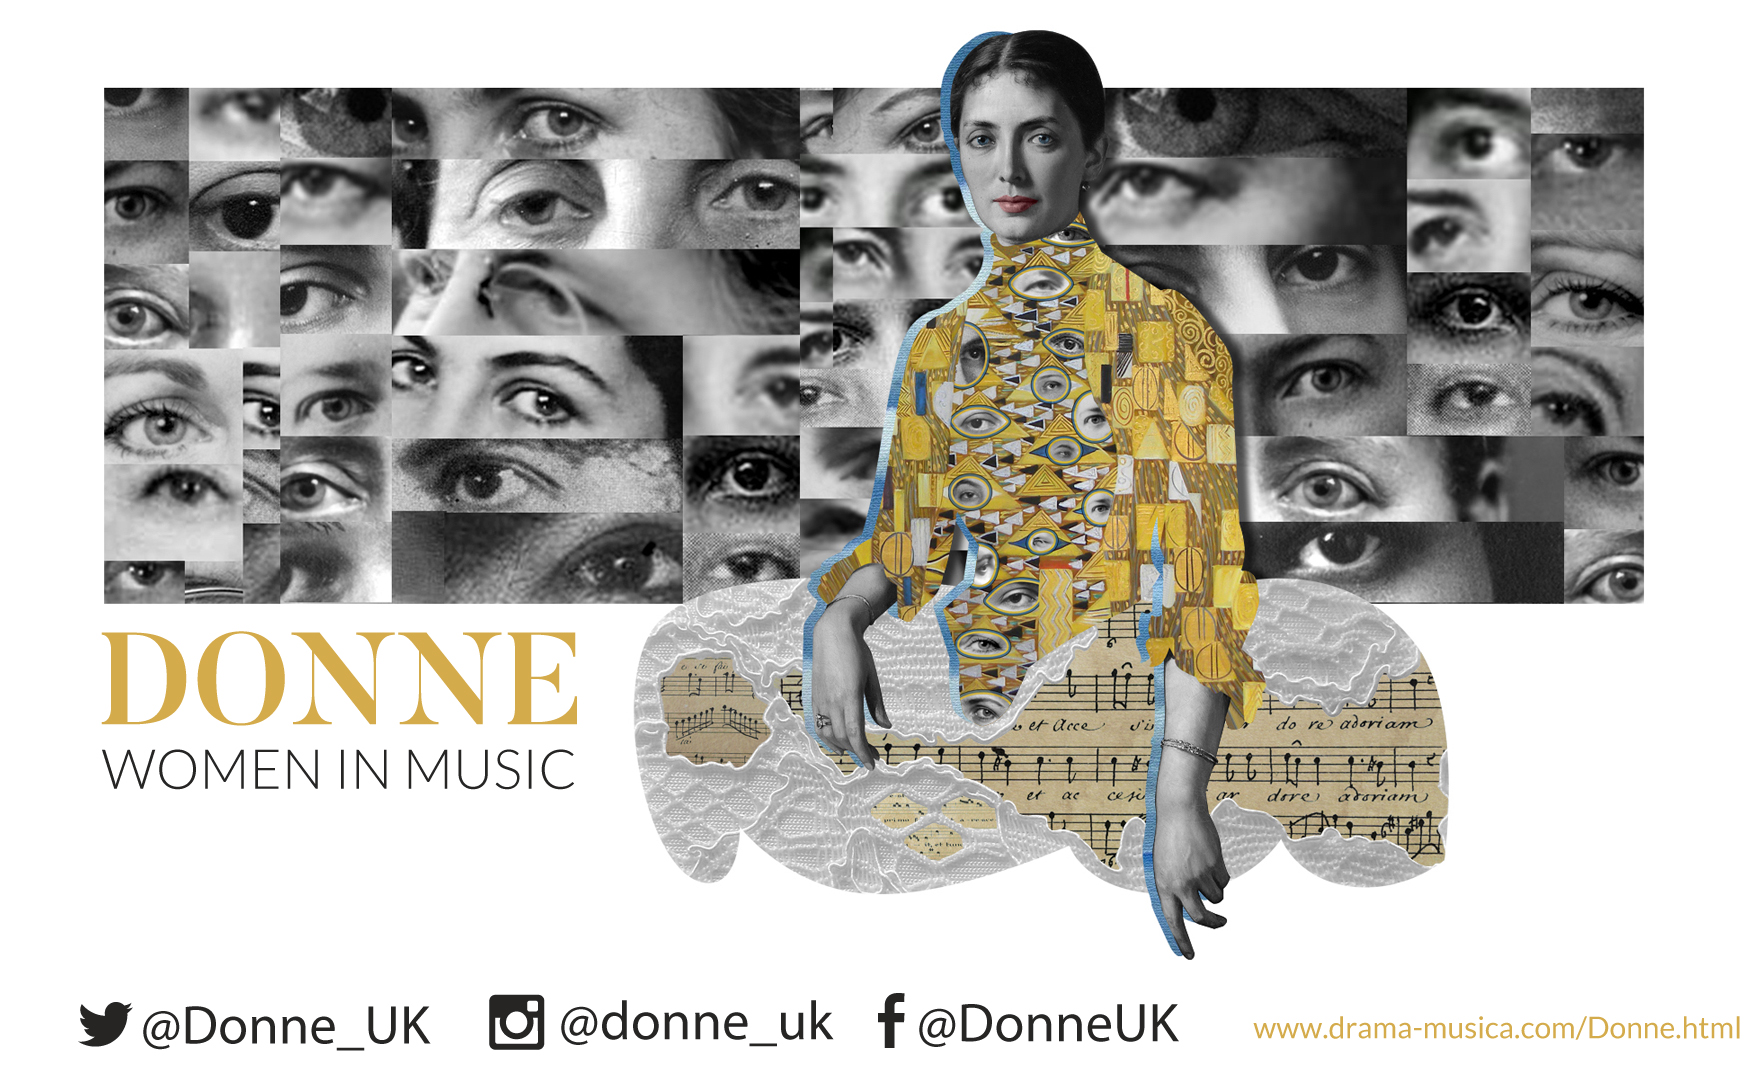 DONNE, Women in Music: The Open Fund for Organisations